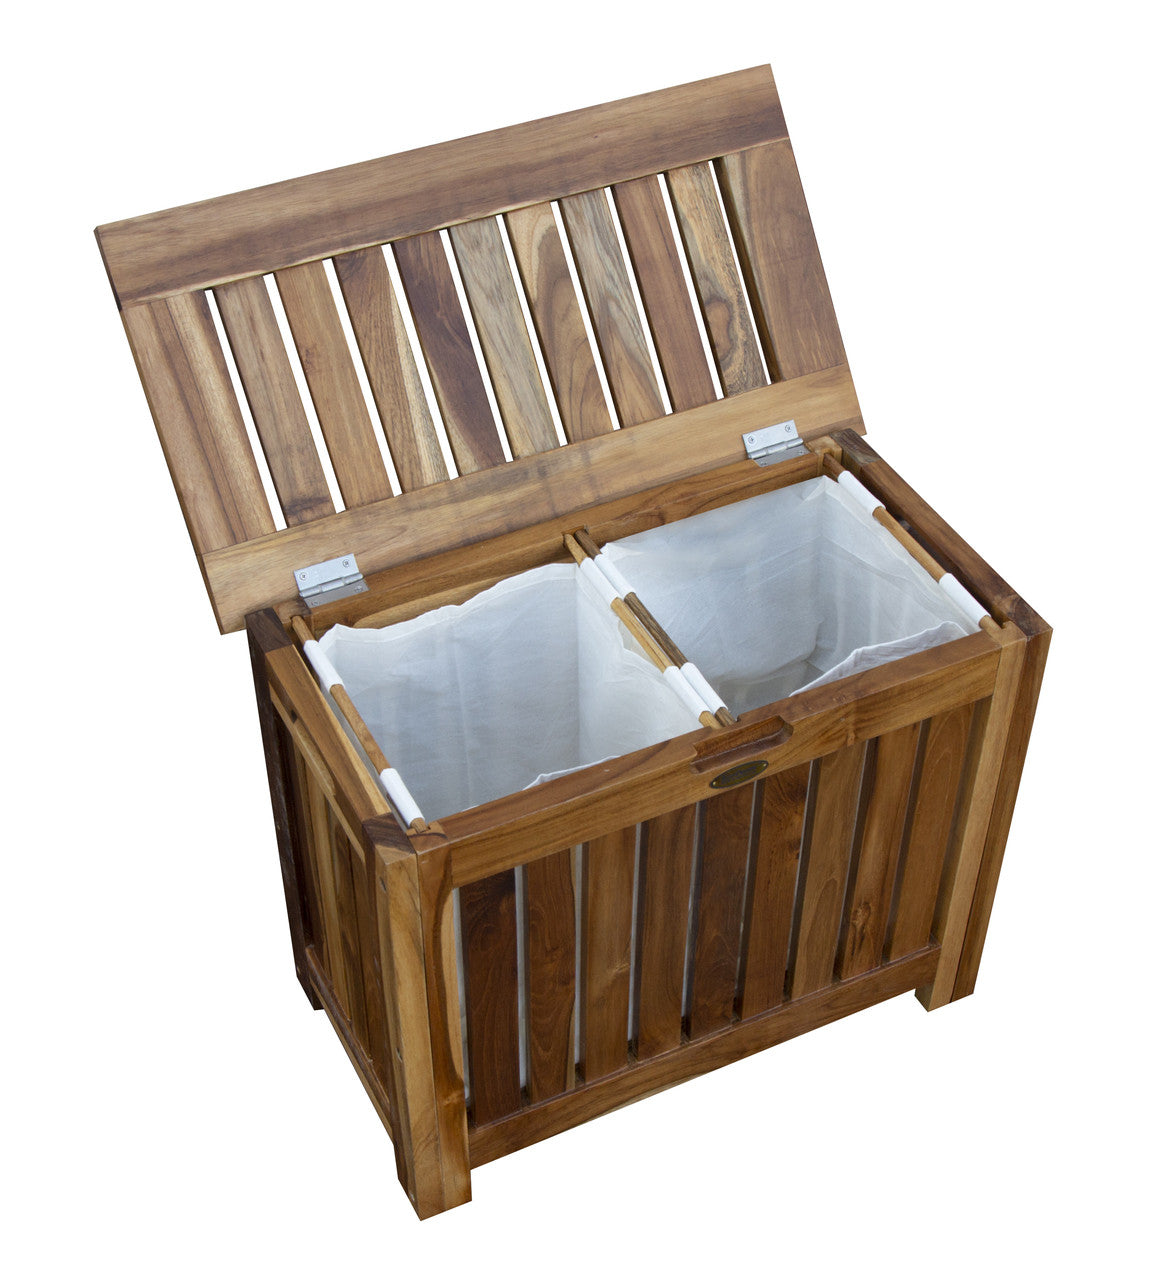 EcoDecors® Eleganto® 23" Wide Teak Wood Double Laundry Storage Hamper with Removable Bags in EarthyTeak Finish